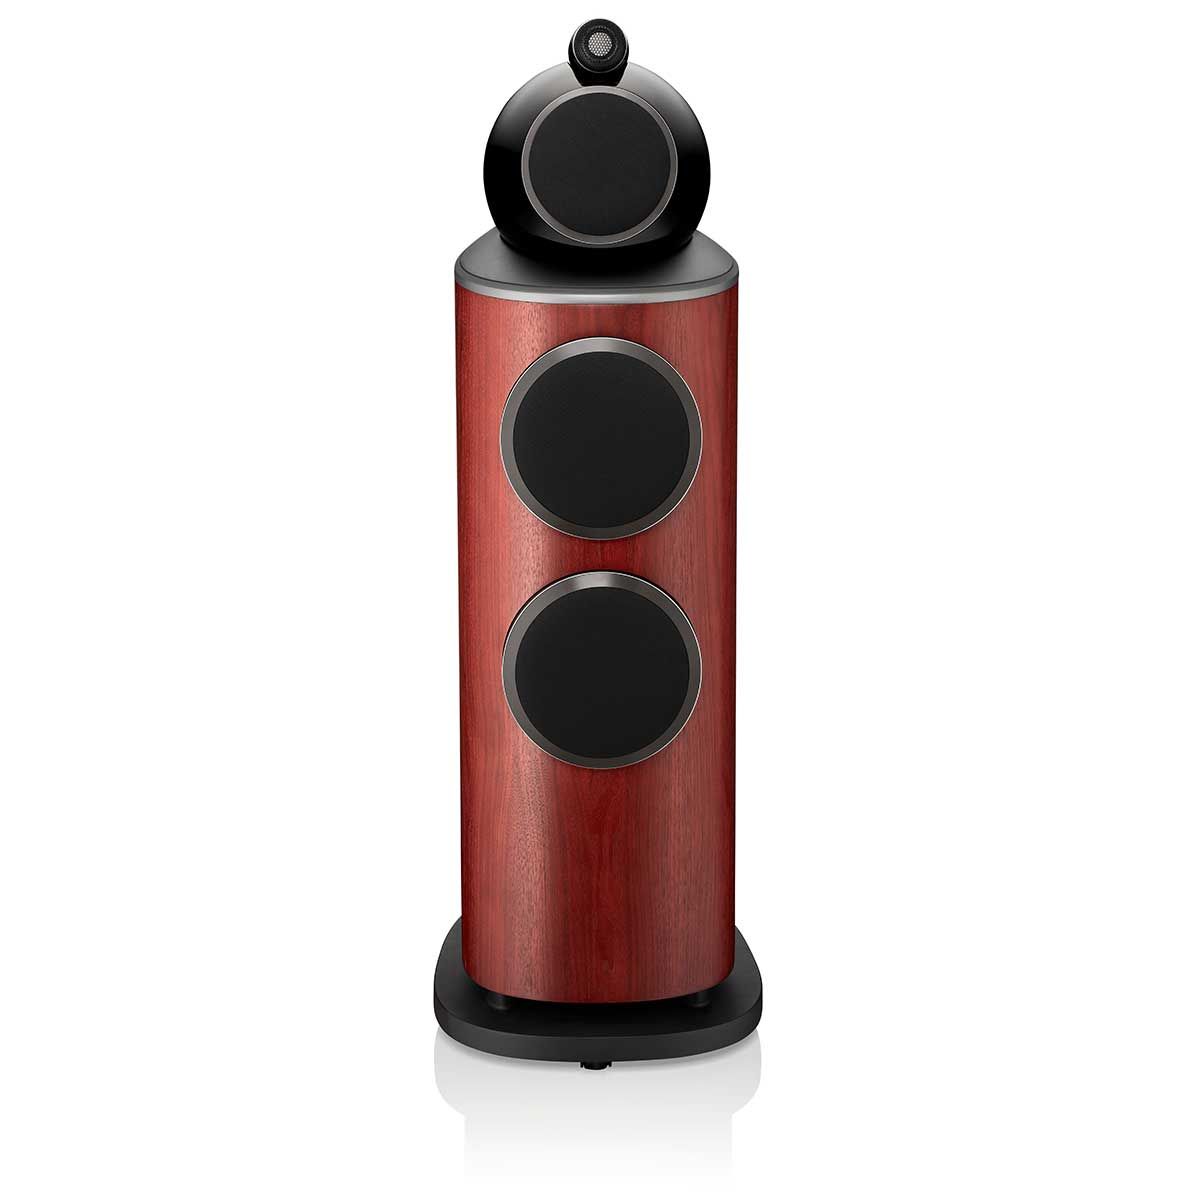 Bowers & Wilkins 802 D4 Floorstanding Speaker, Satin Rosenut, front view with grille